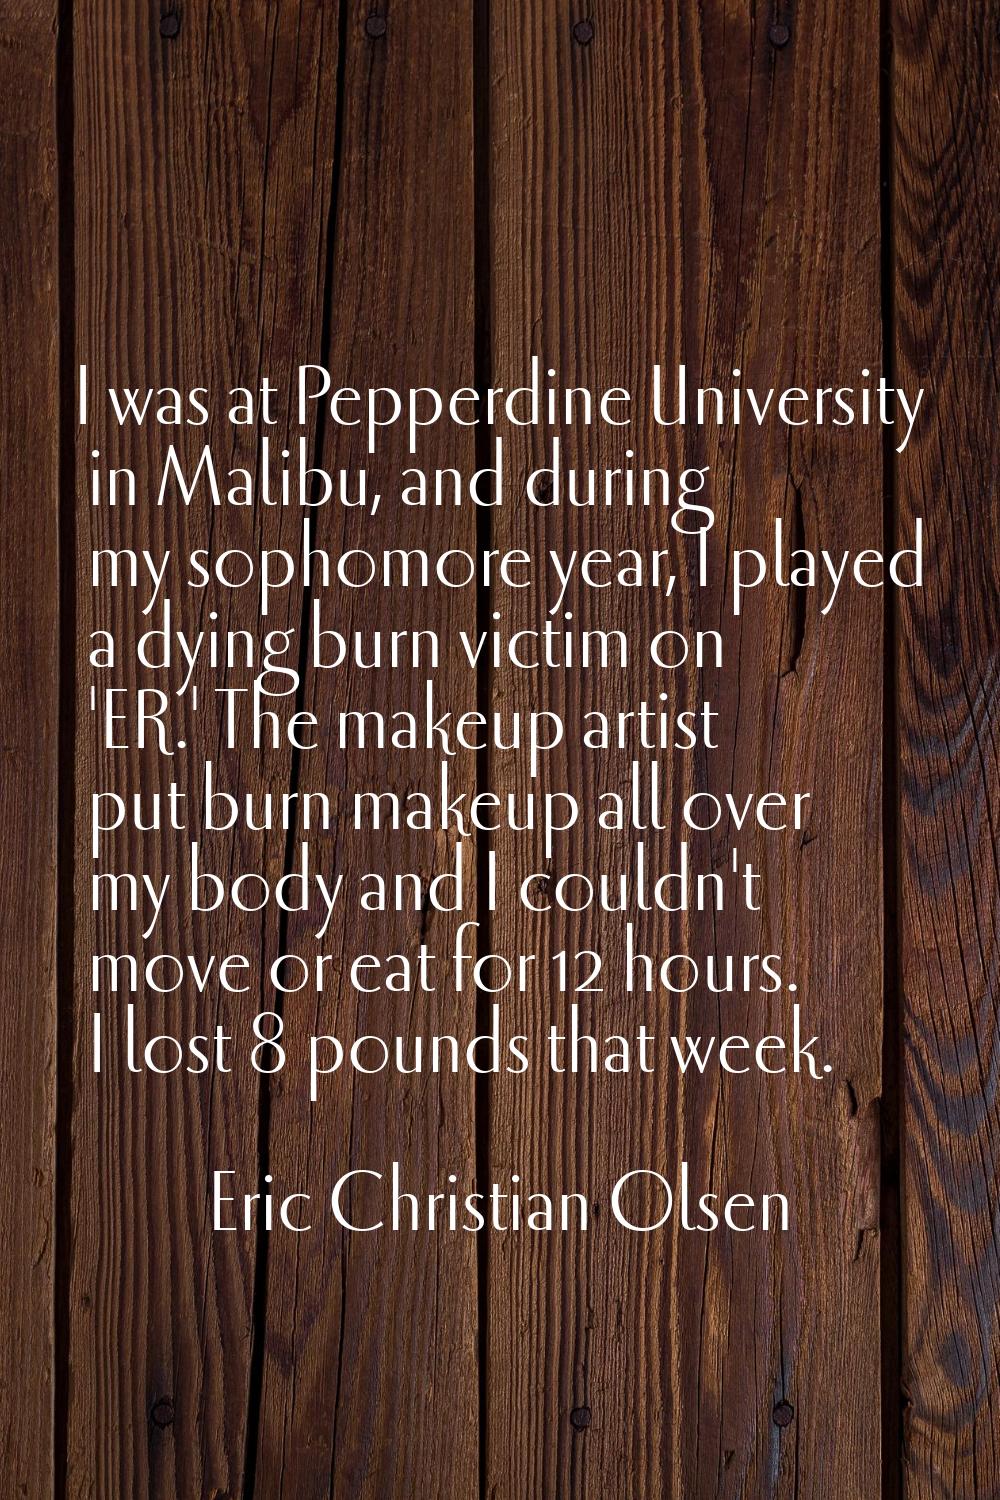 I was at Pepperdine University in Malibu, and during my sophomore year, I played a dying burn victi